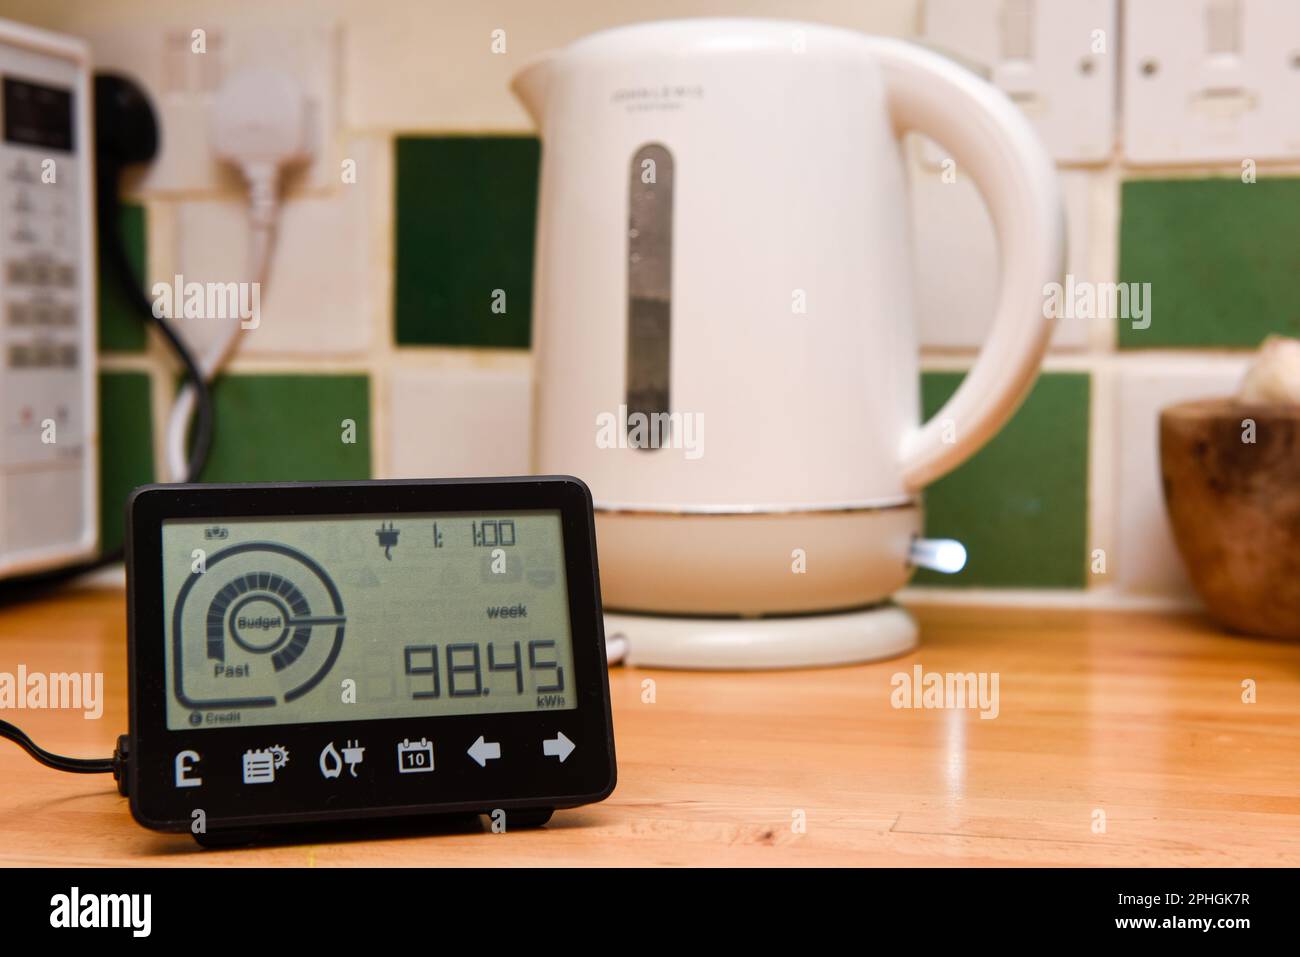 Smart energy meter in a home interior to monitor electricity usage in the house and reduce cost of living price Stock Photo